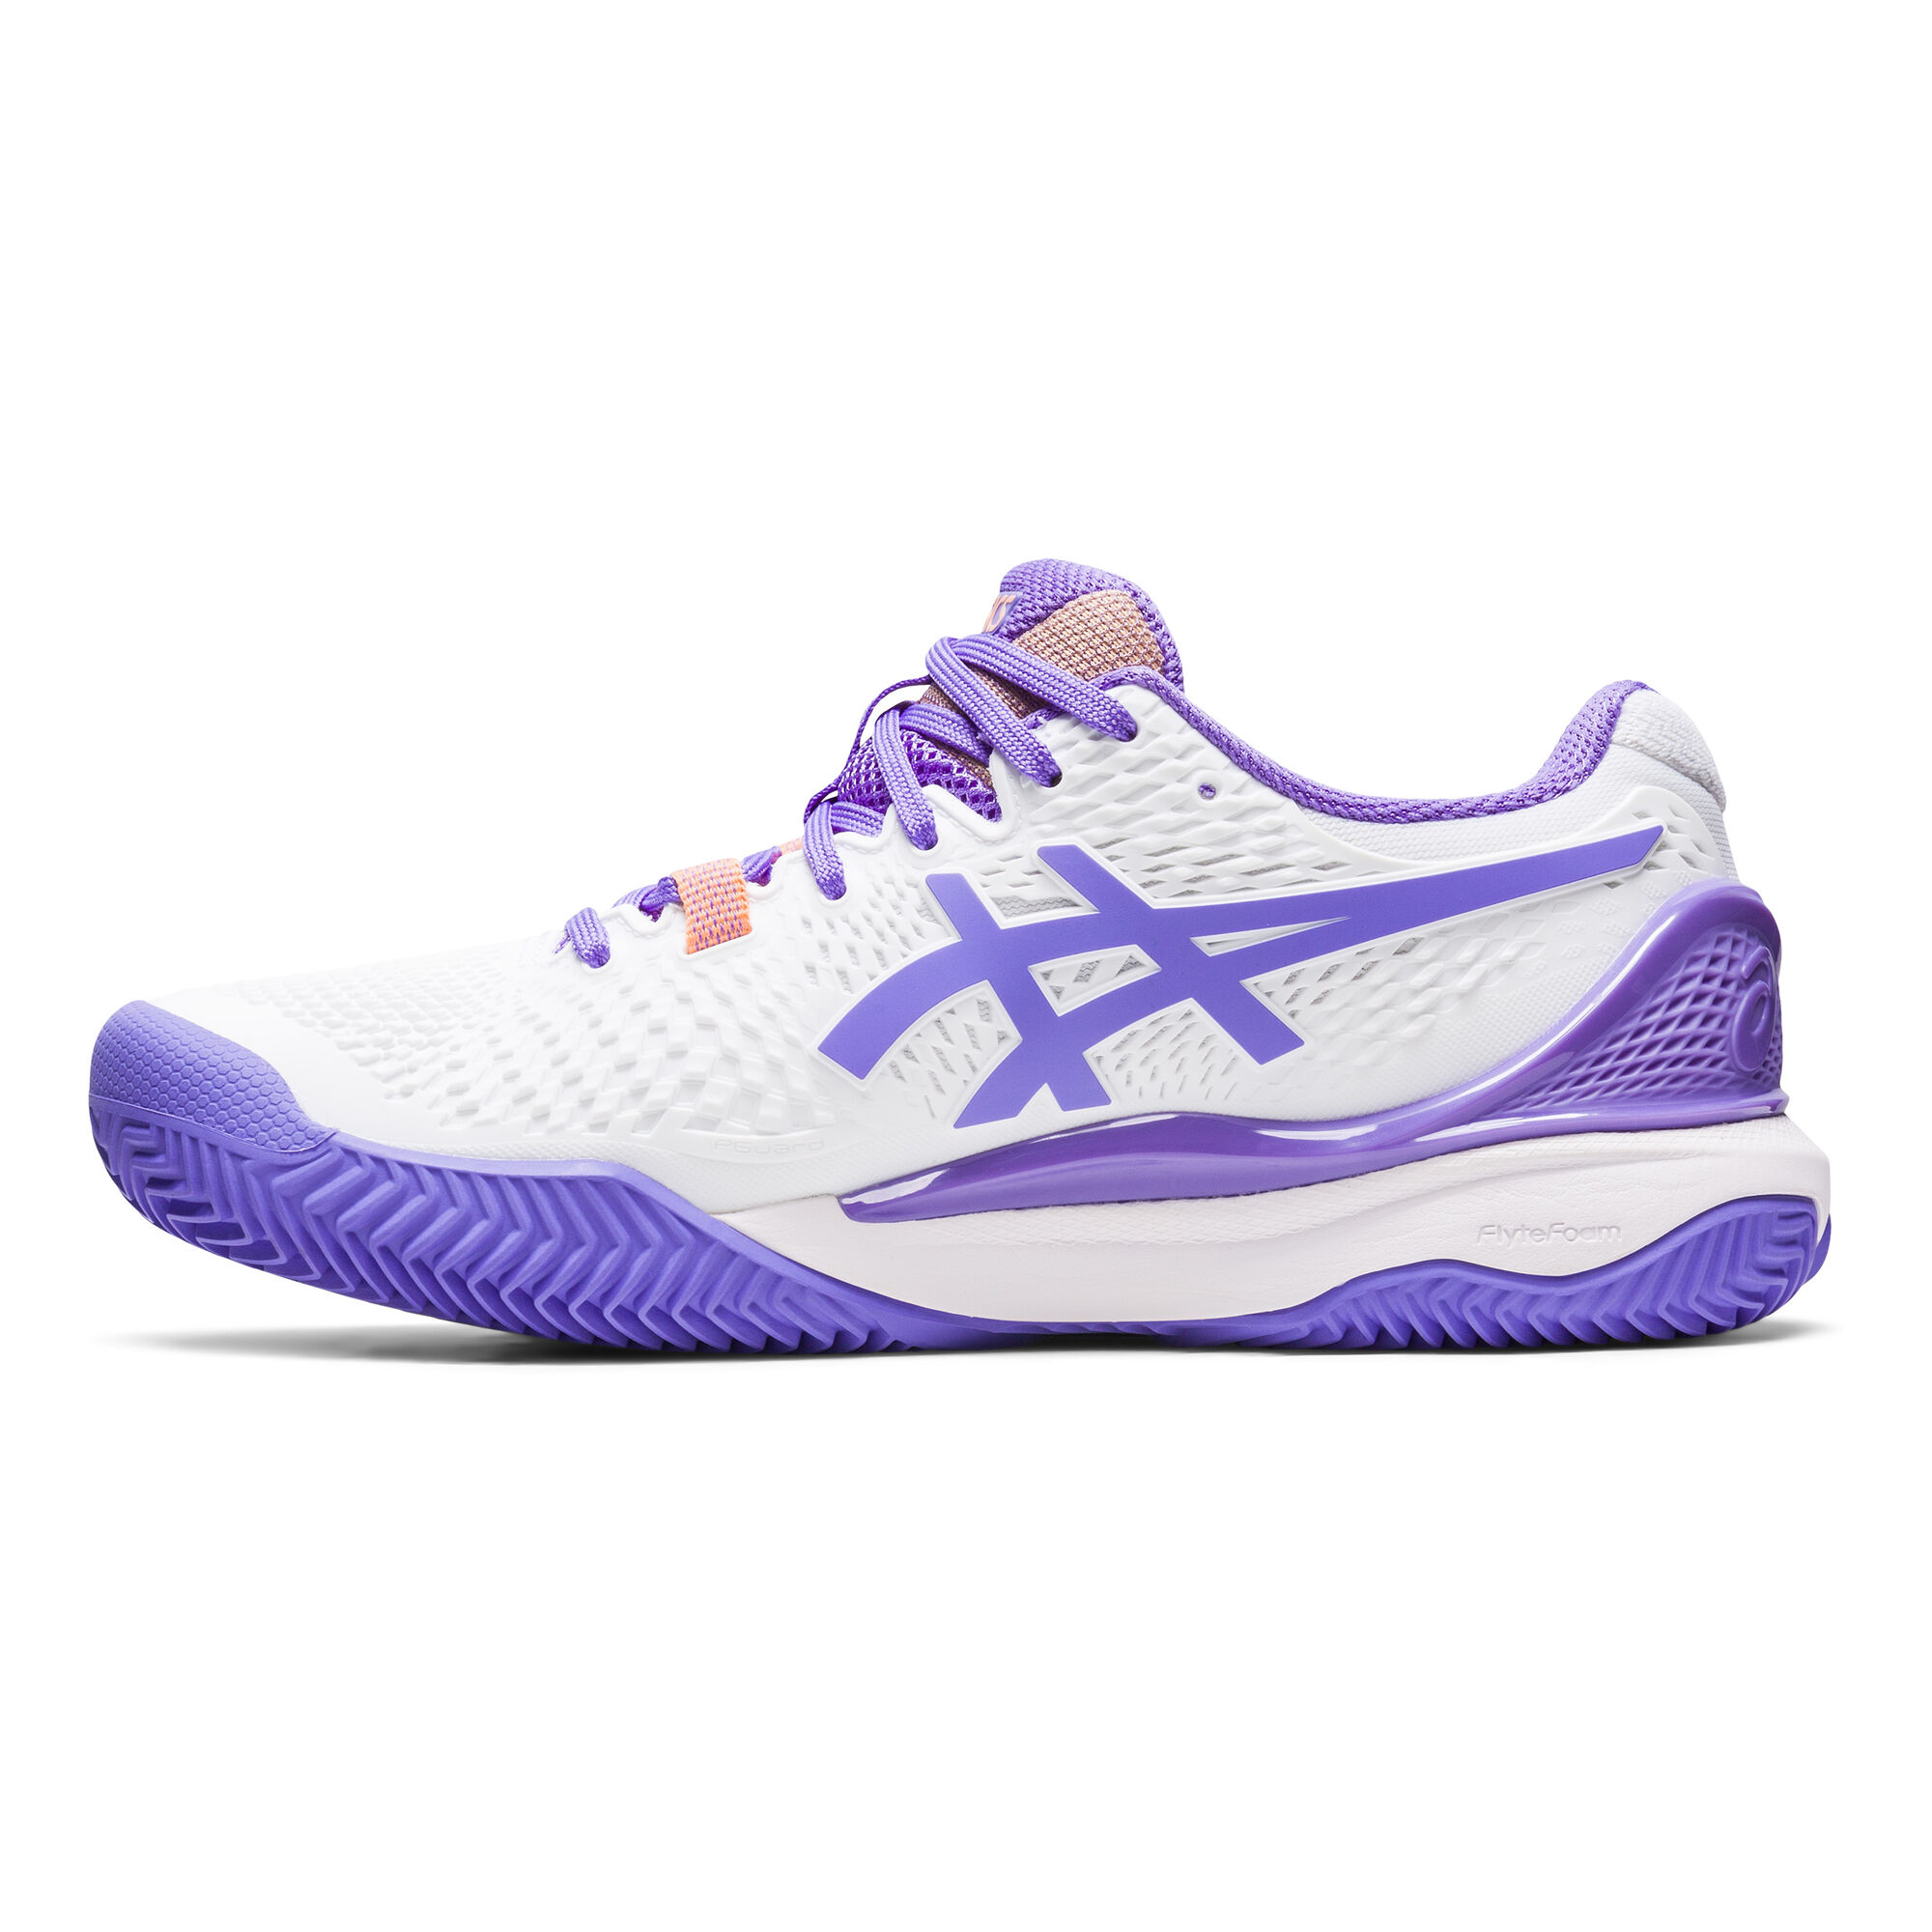 Buy ASICS Gel-Resolution 9 Clay Court Shoe Women White, Lilac online